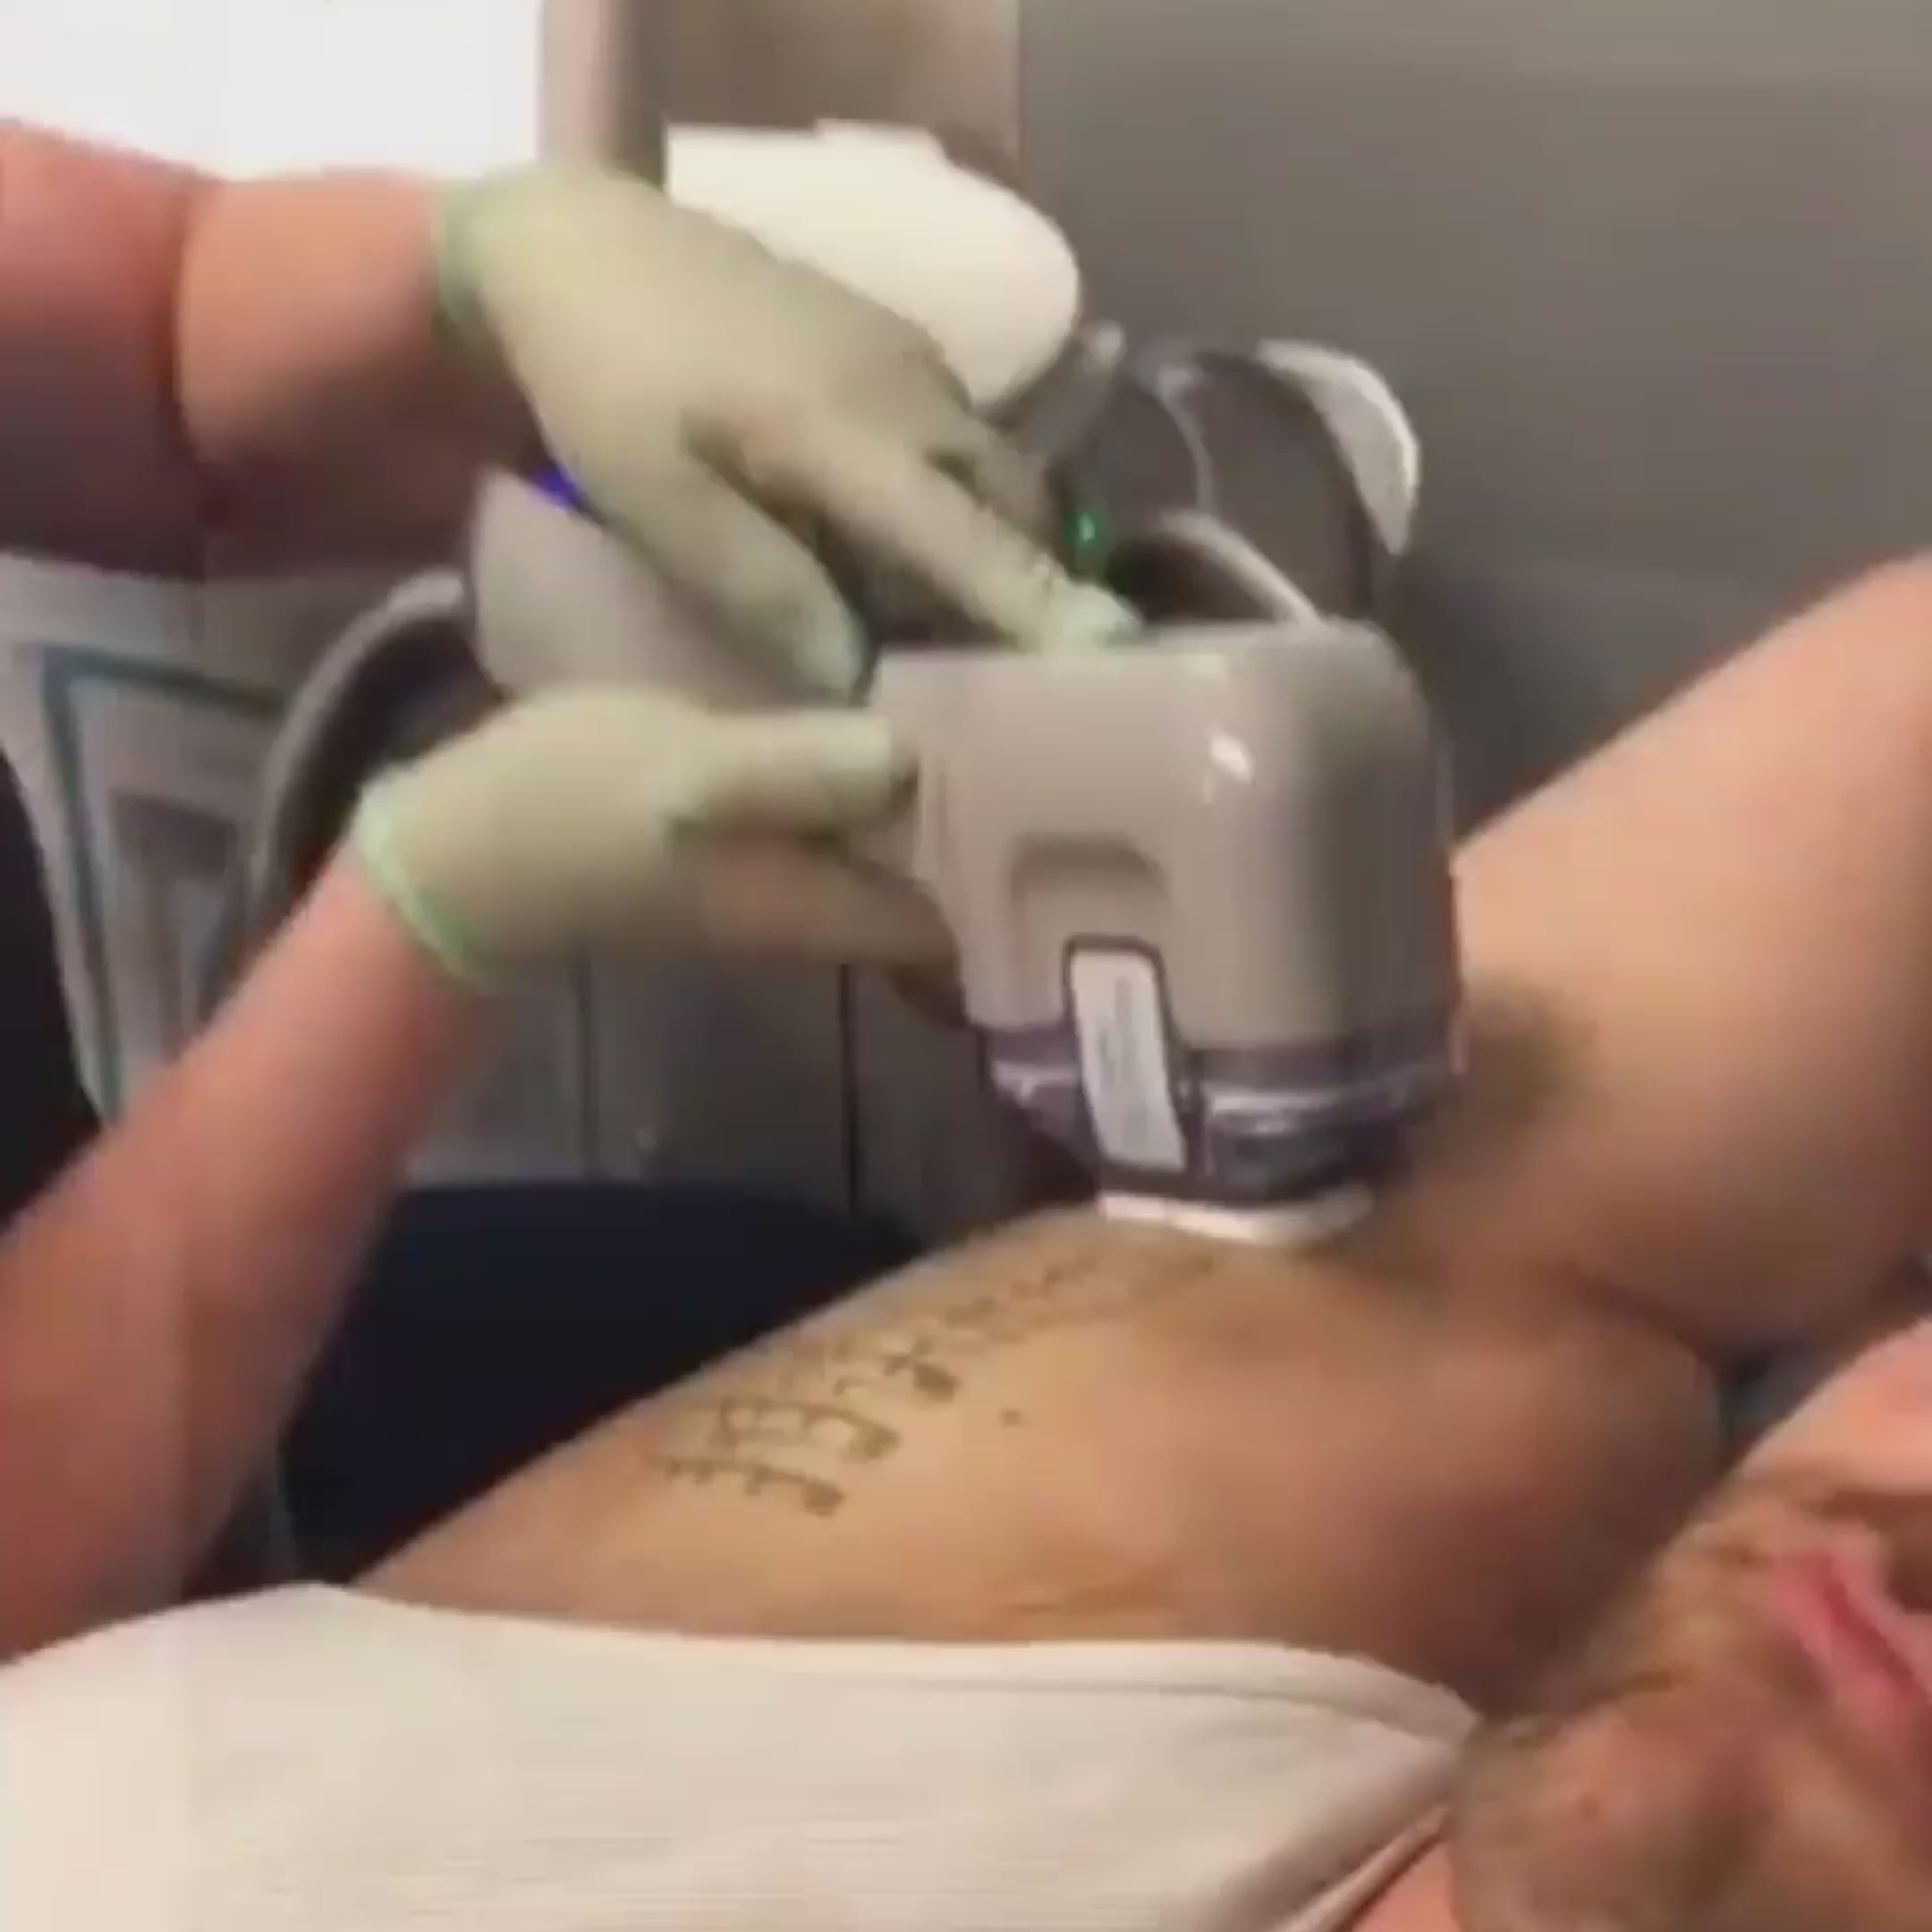 Man getting miraDry treatment for underarm sweat and odor